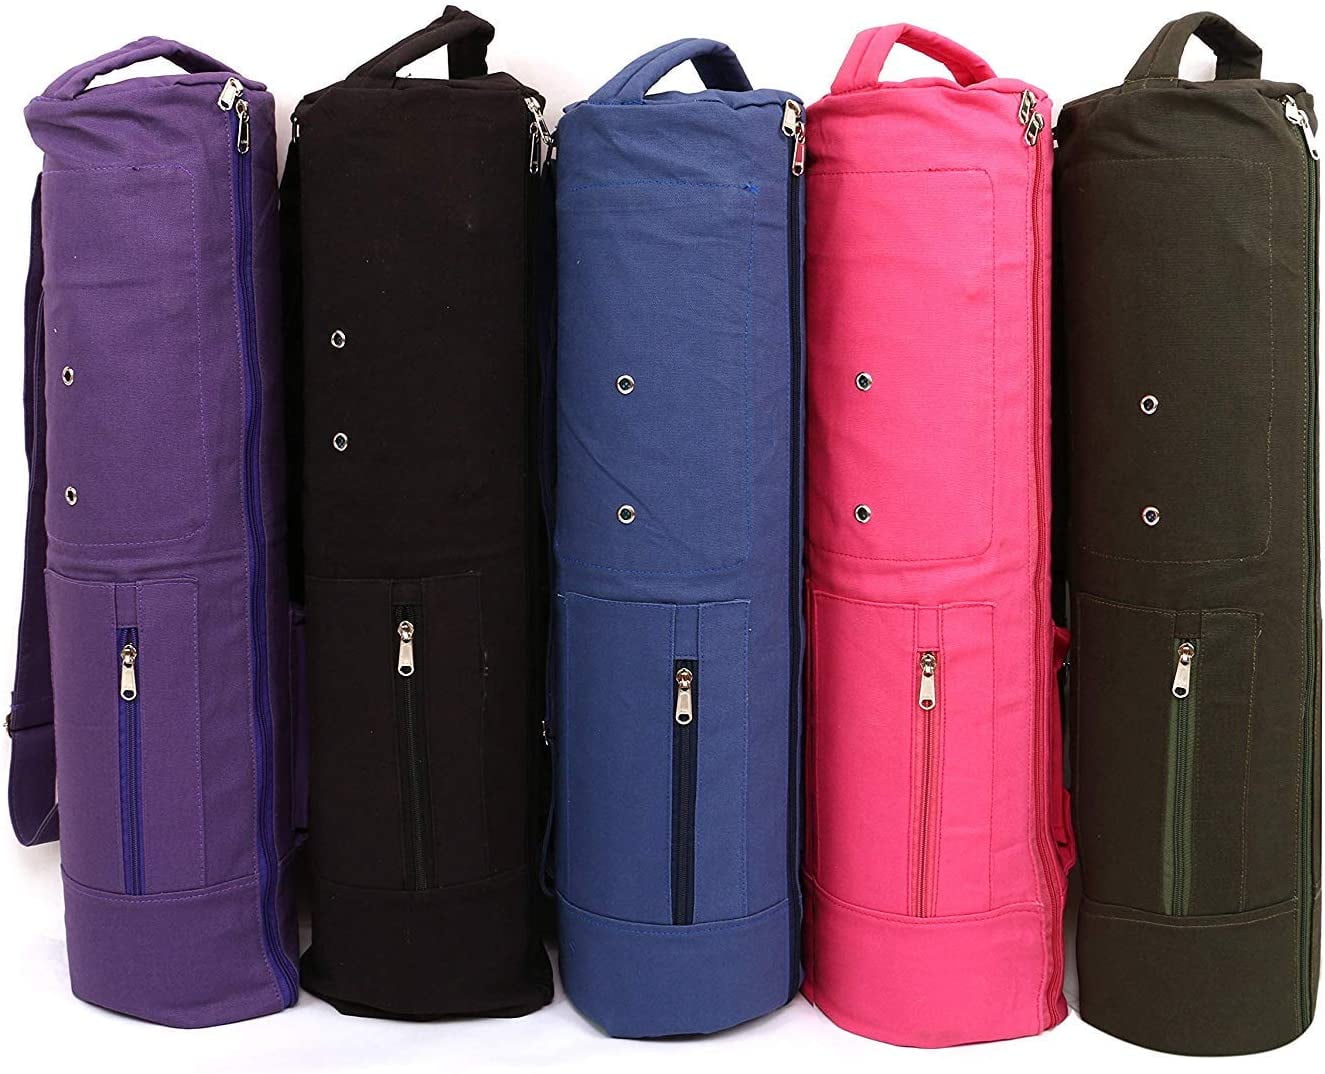 KD Yoga Bag MAT Cover Full Zip Carry Bag with Multiple Pockets Storage Area Adjustable Strap 